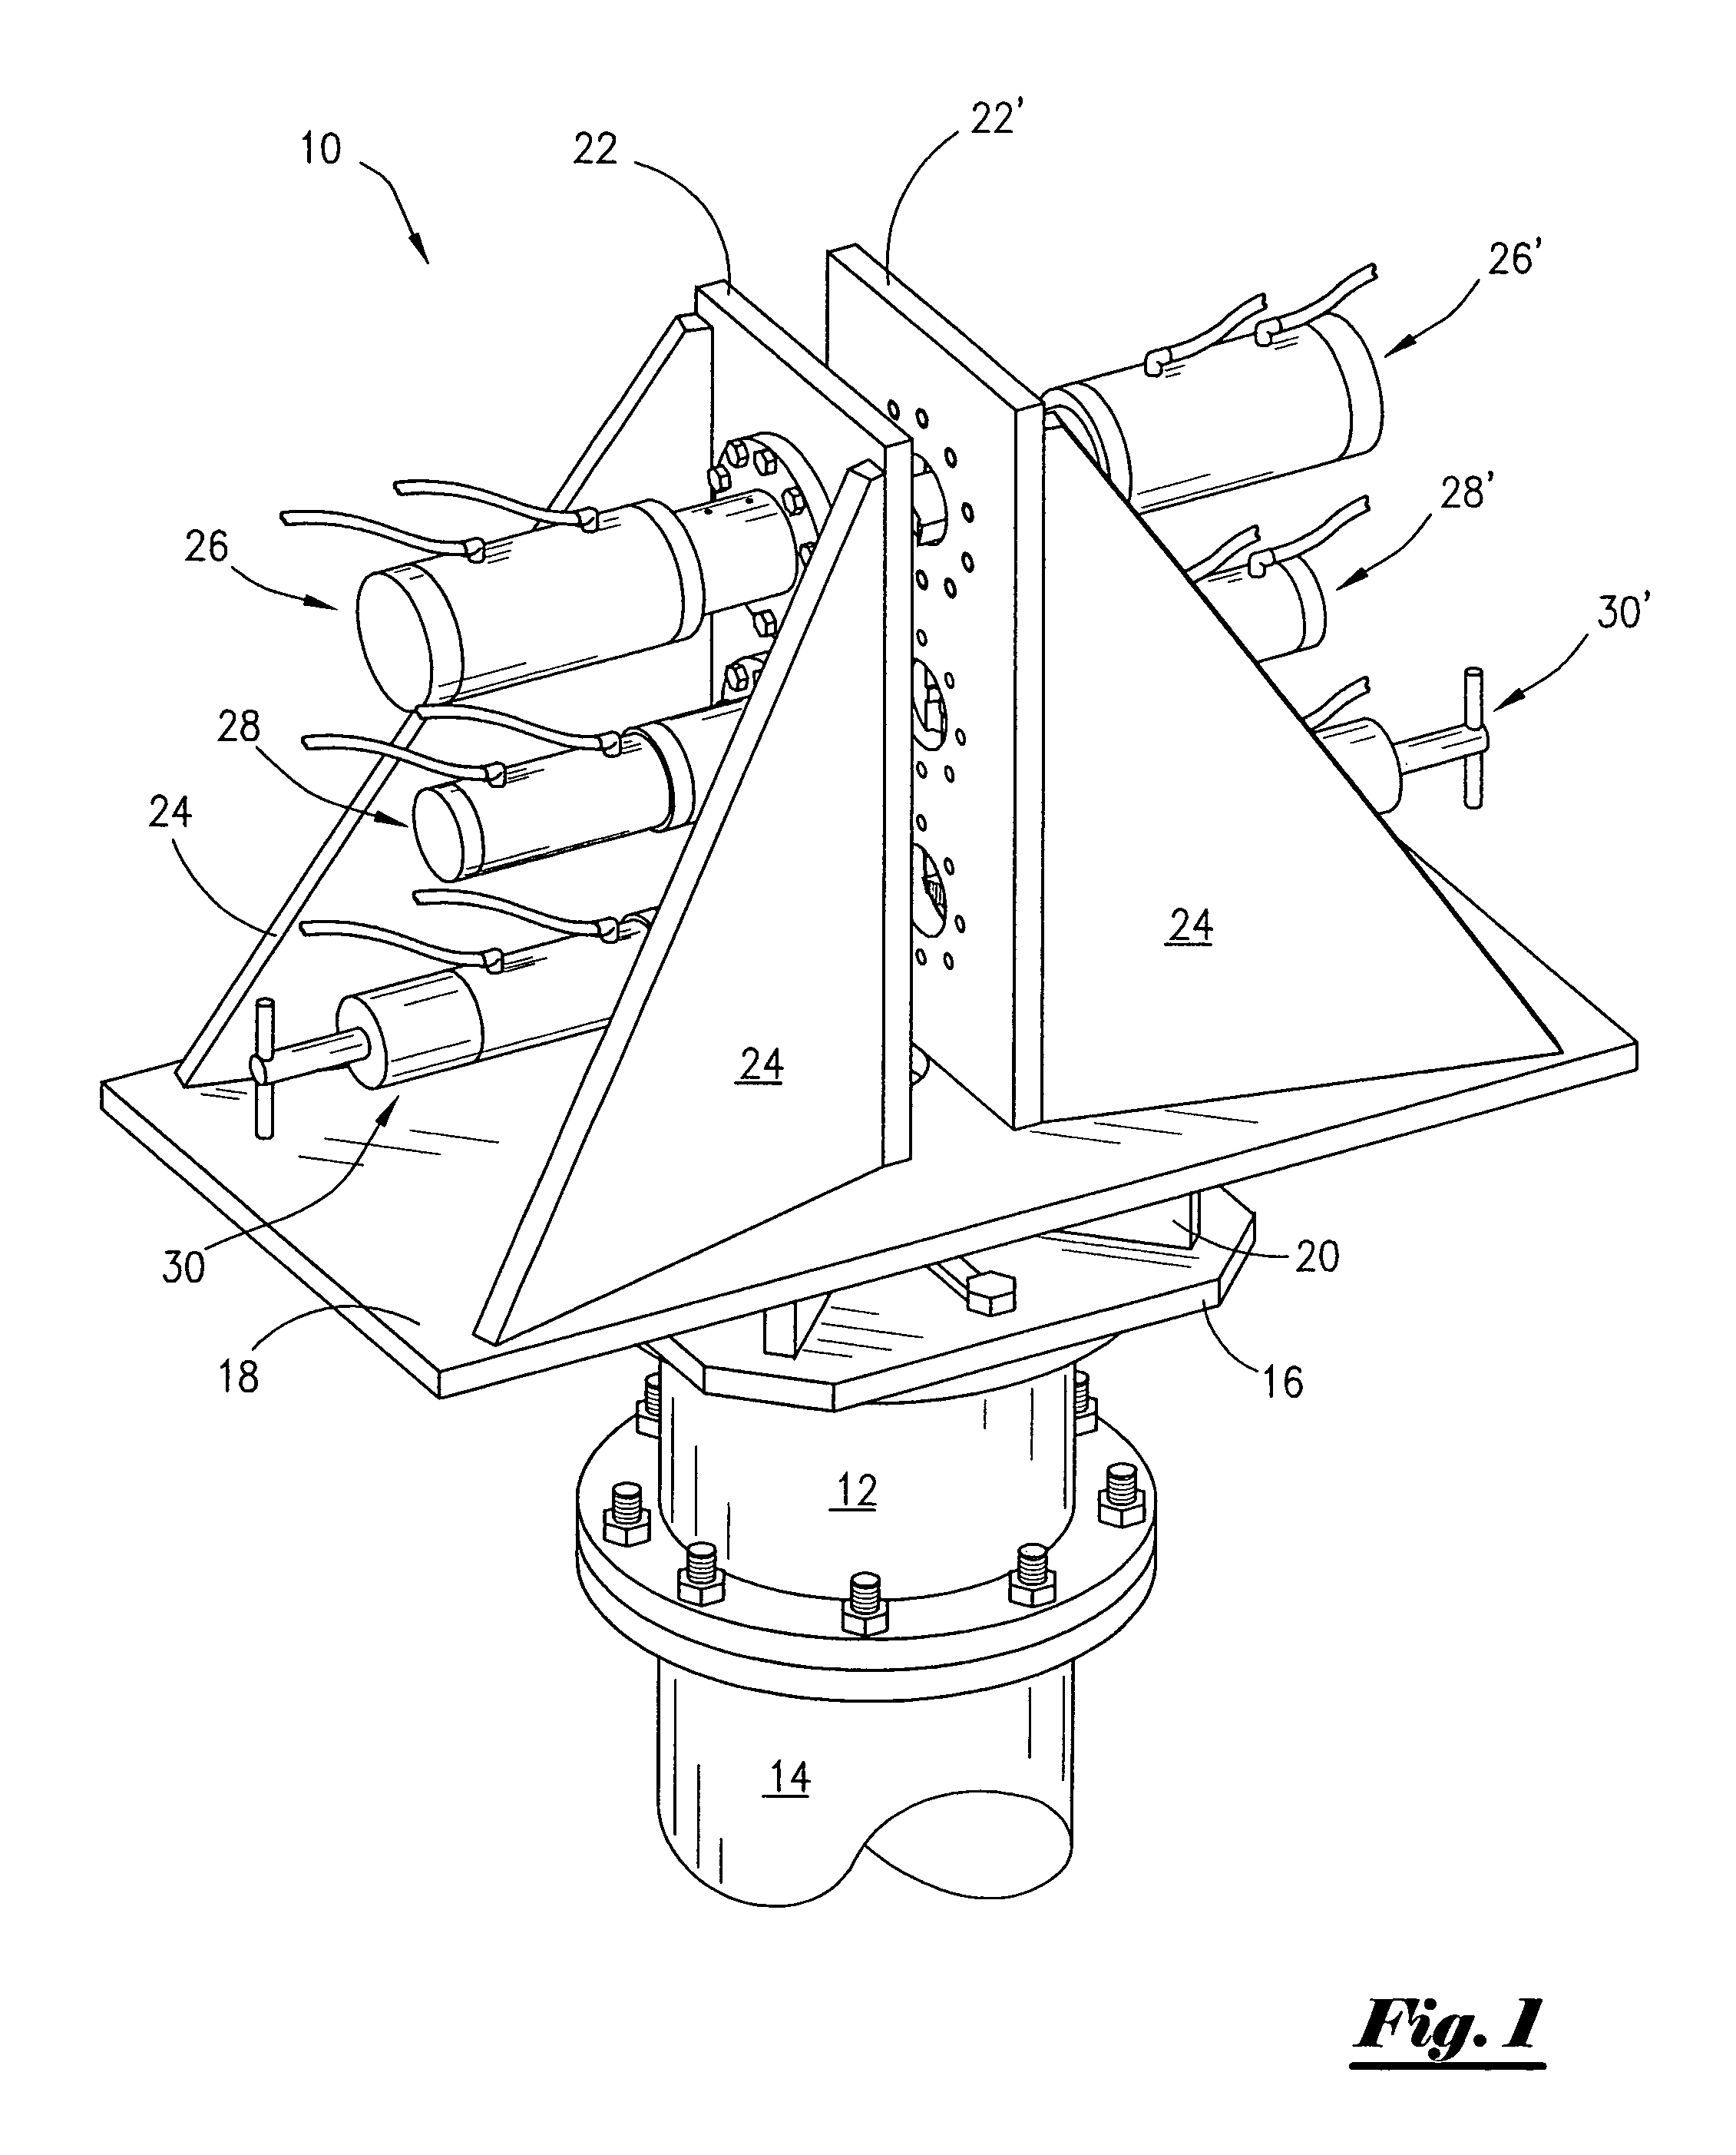 Apparatus and method for extracting a tubular string from a bore hole